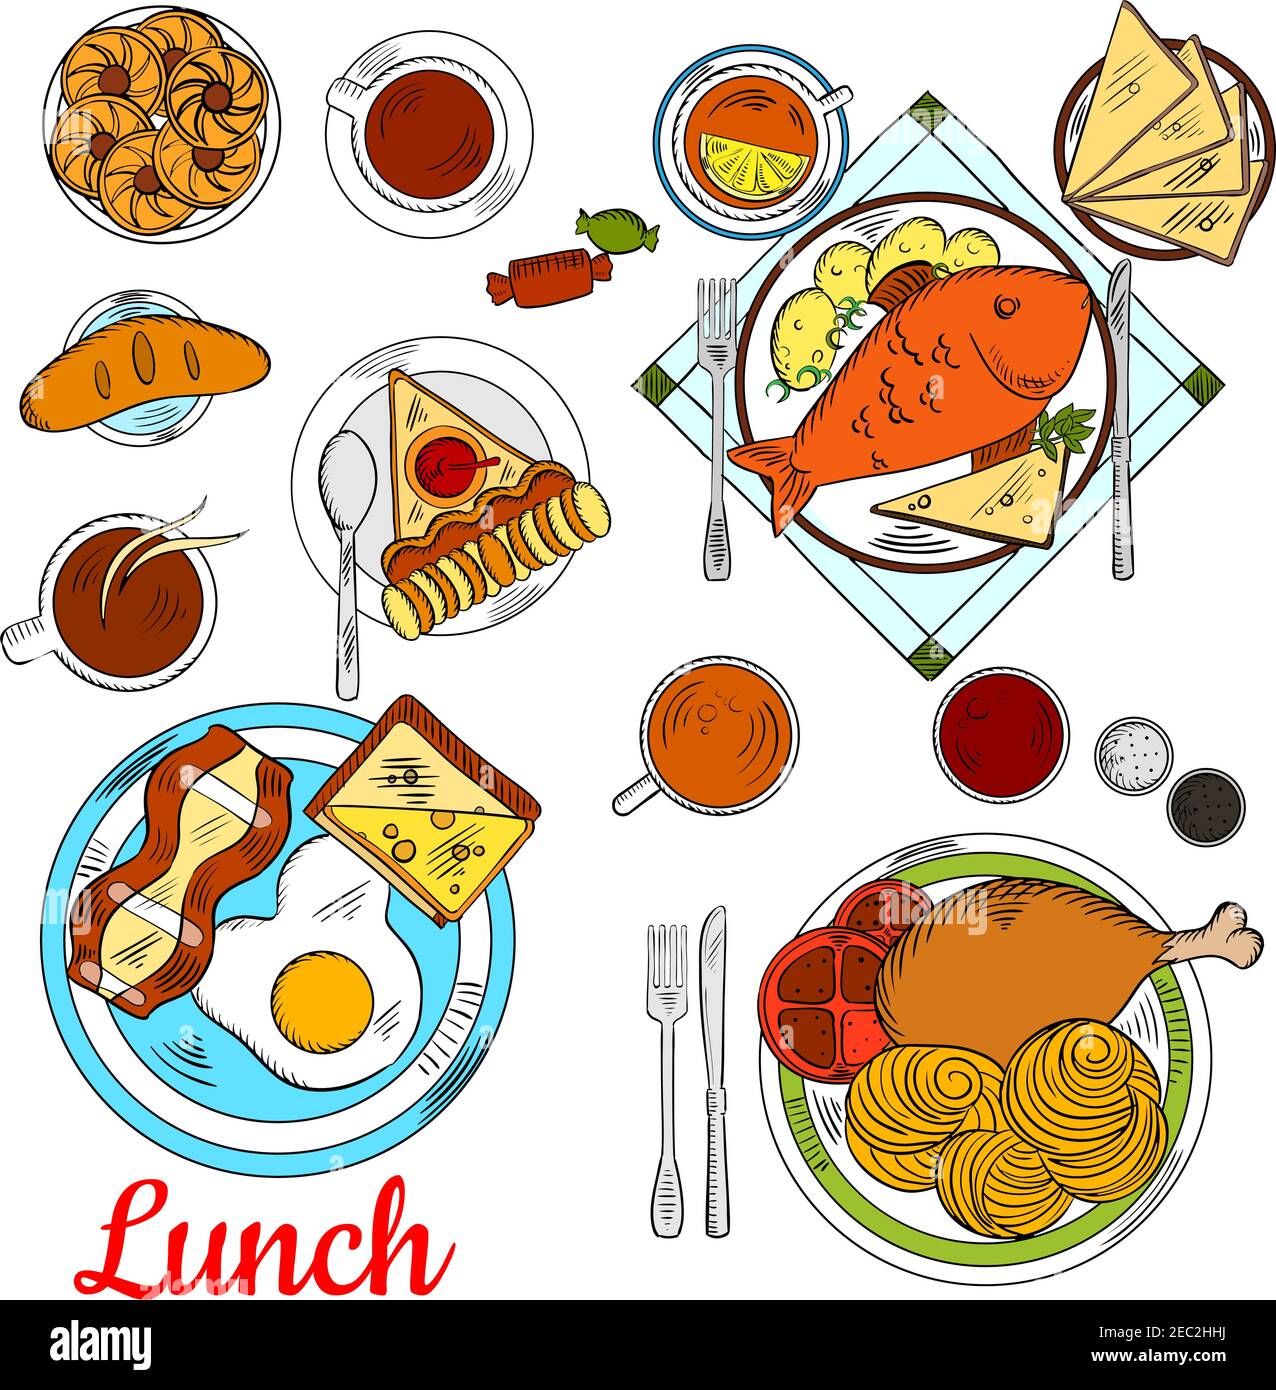 Healthy lunch menu icon with colorful sketches of fried egg with bacon and toast with cheese, baked fish, served with potato, pasta with tomatoes and Stock Vector